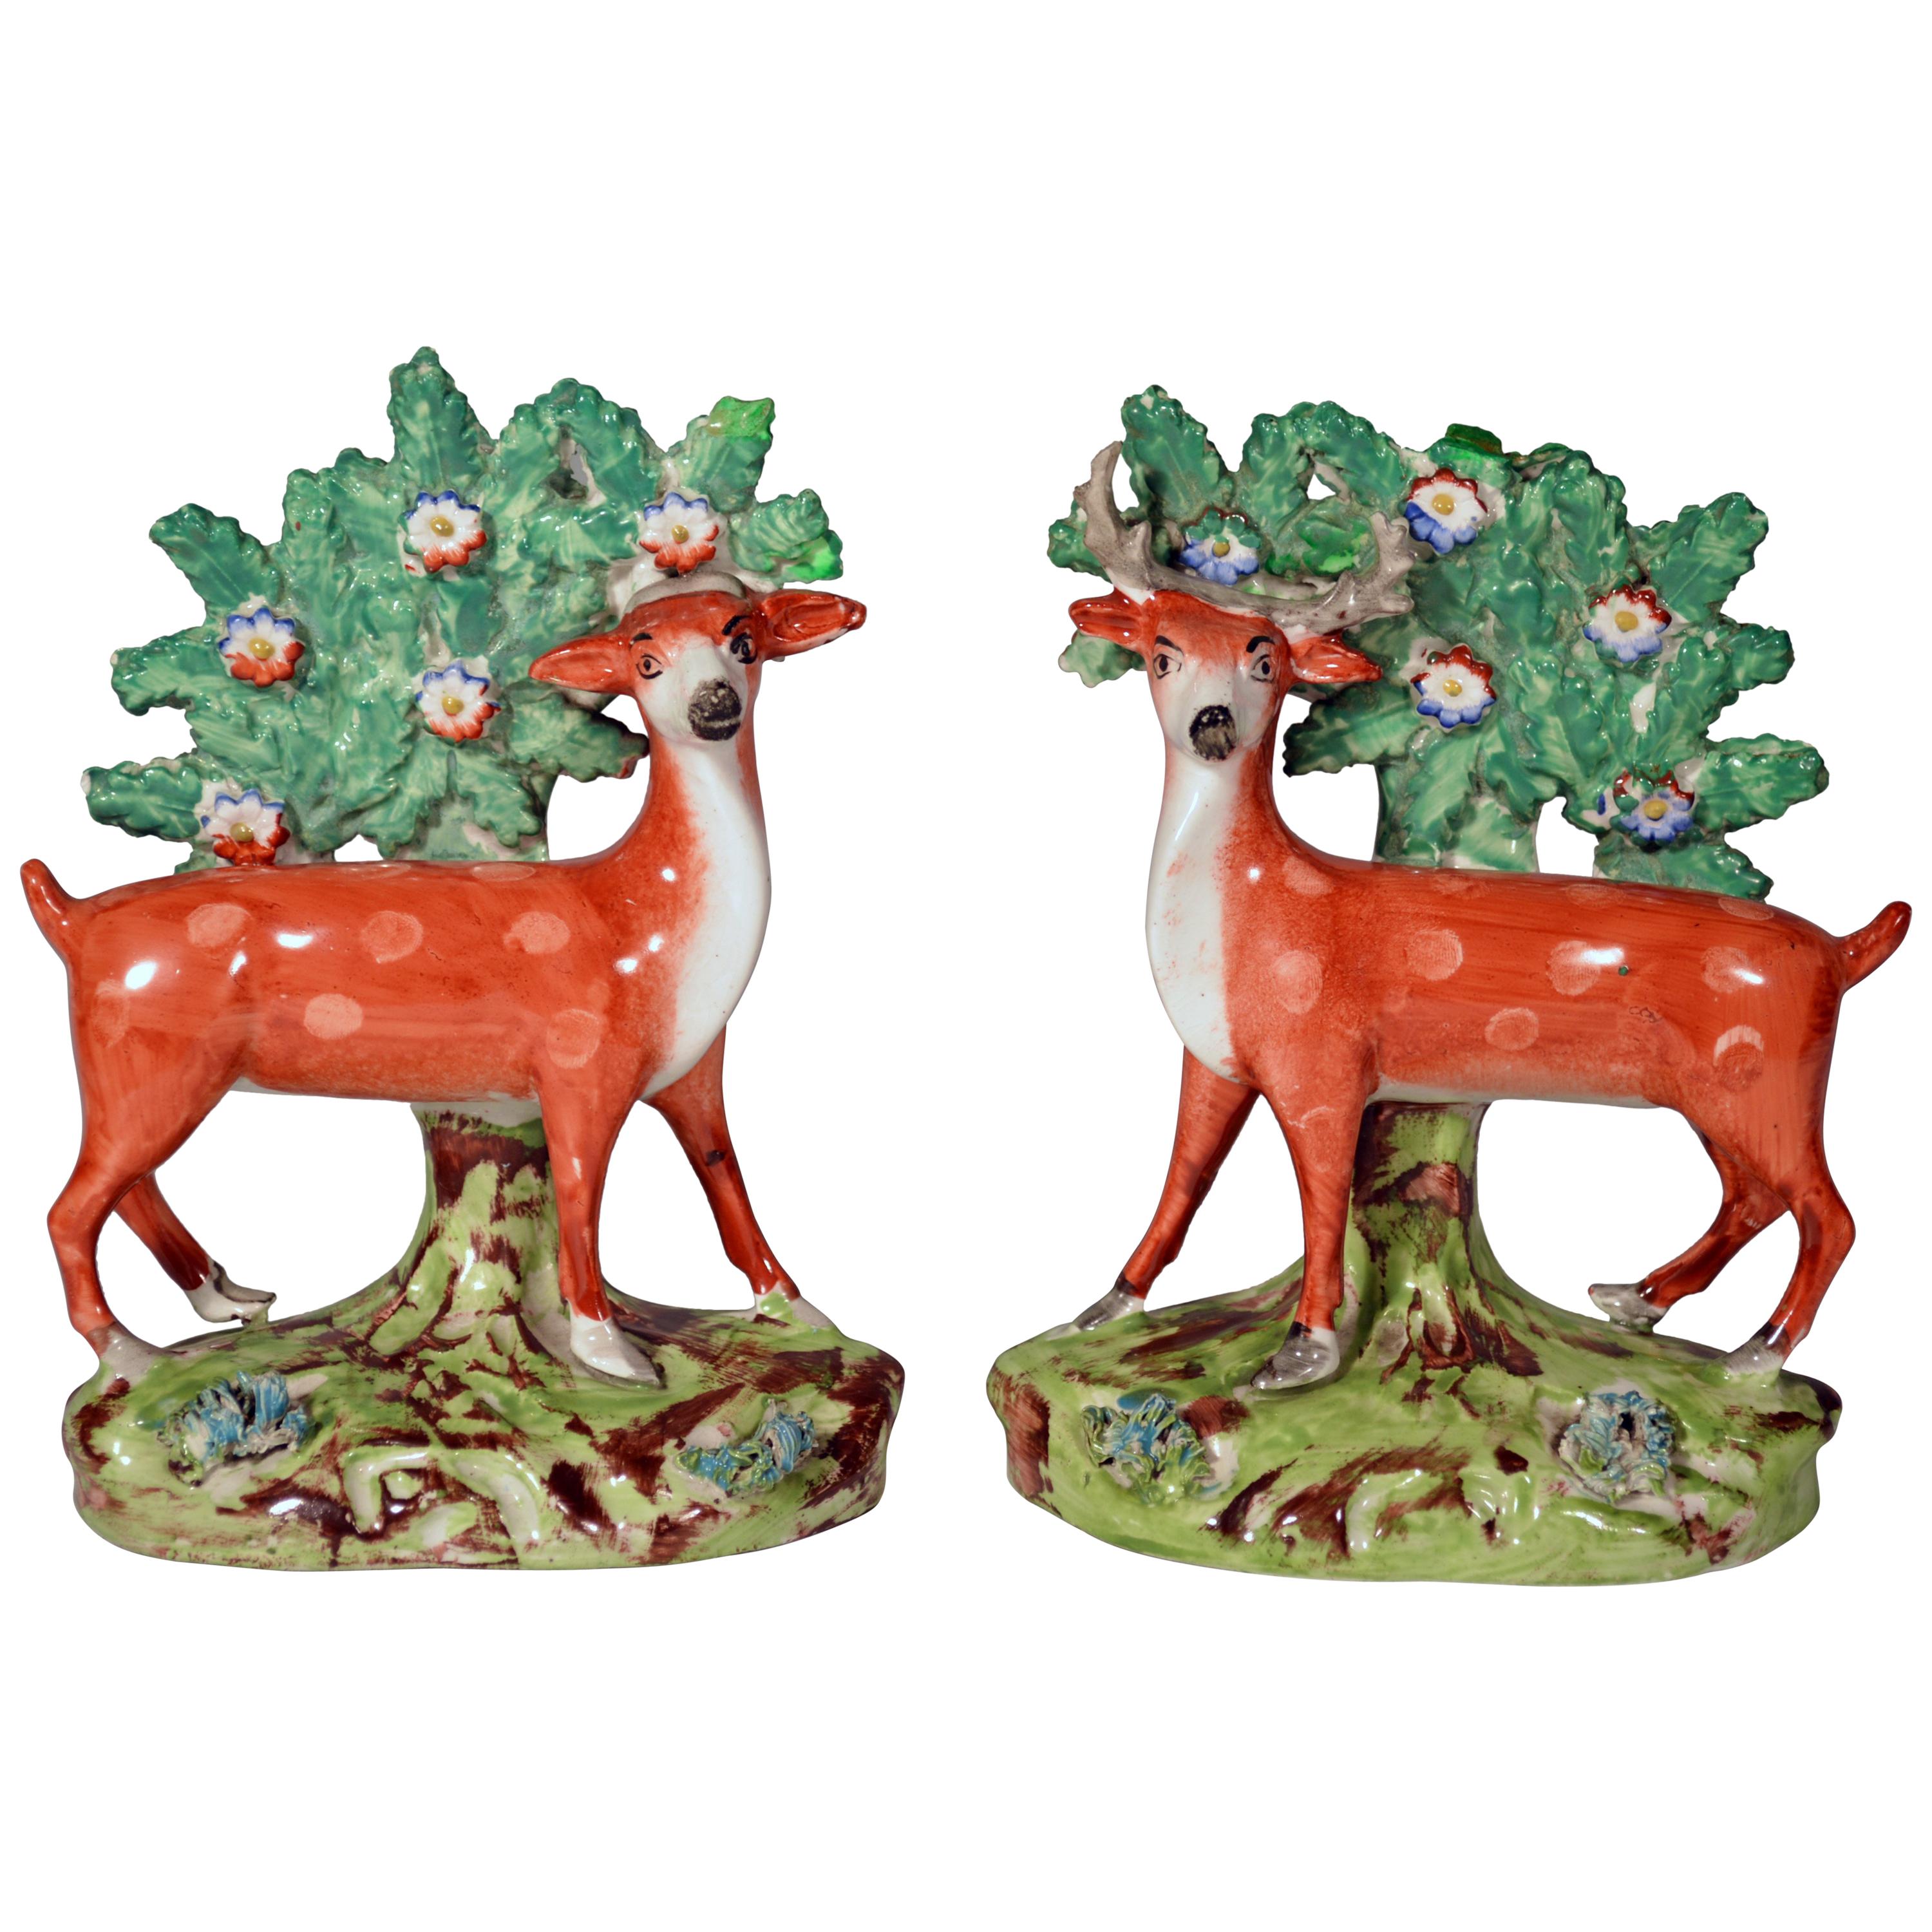 Early Staffordshire Pearlware Pair of Deer Bocage Figures, circa 1825